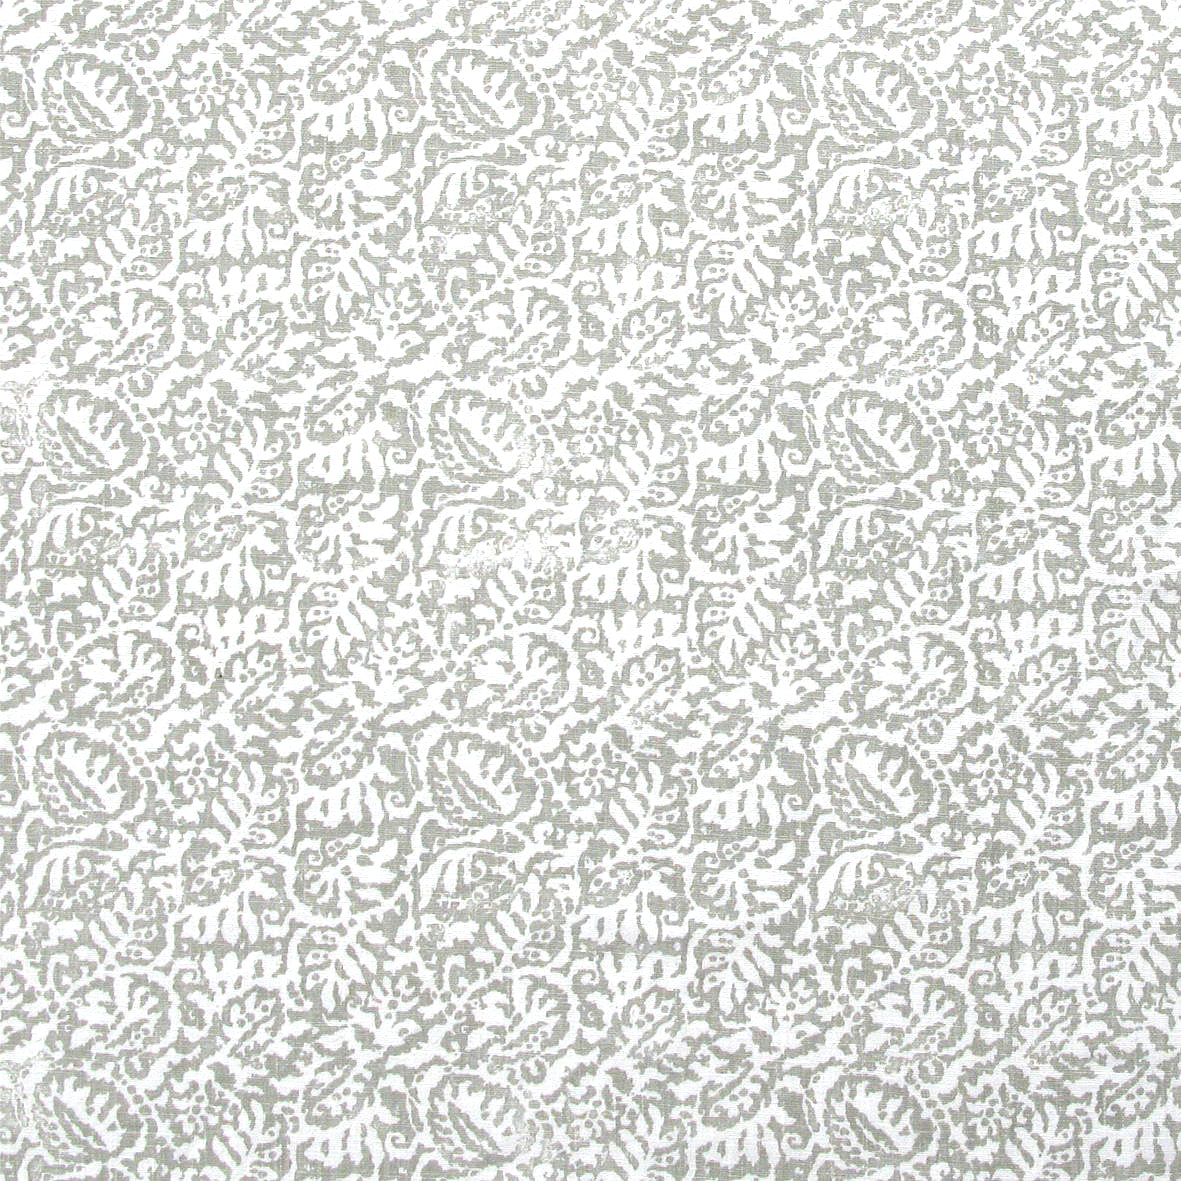 Detail of fabric in a dense paisley print in white on a light gray field.